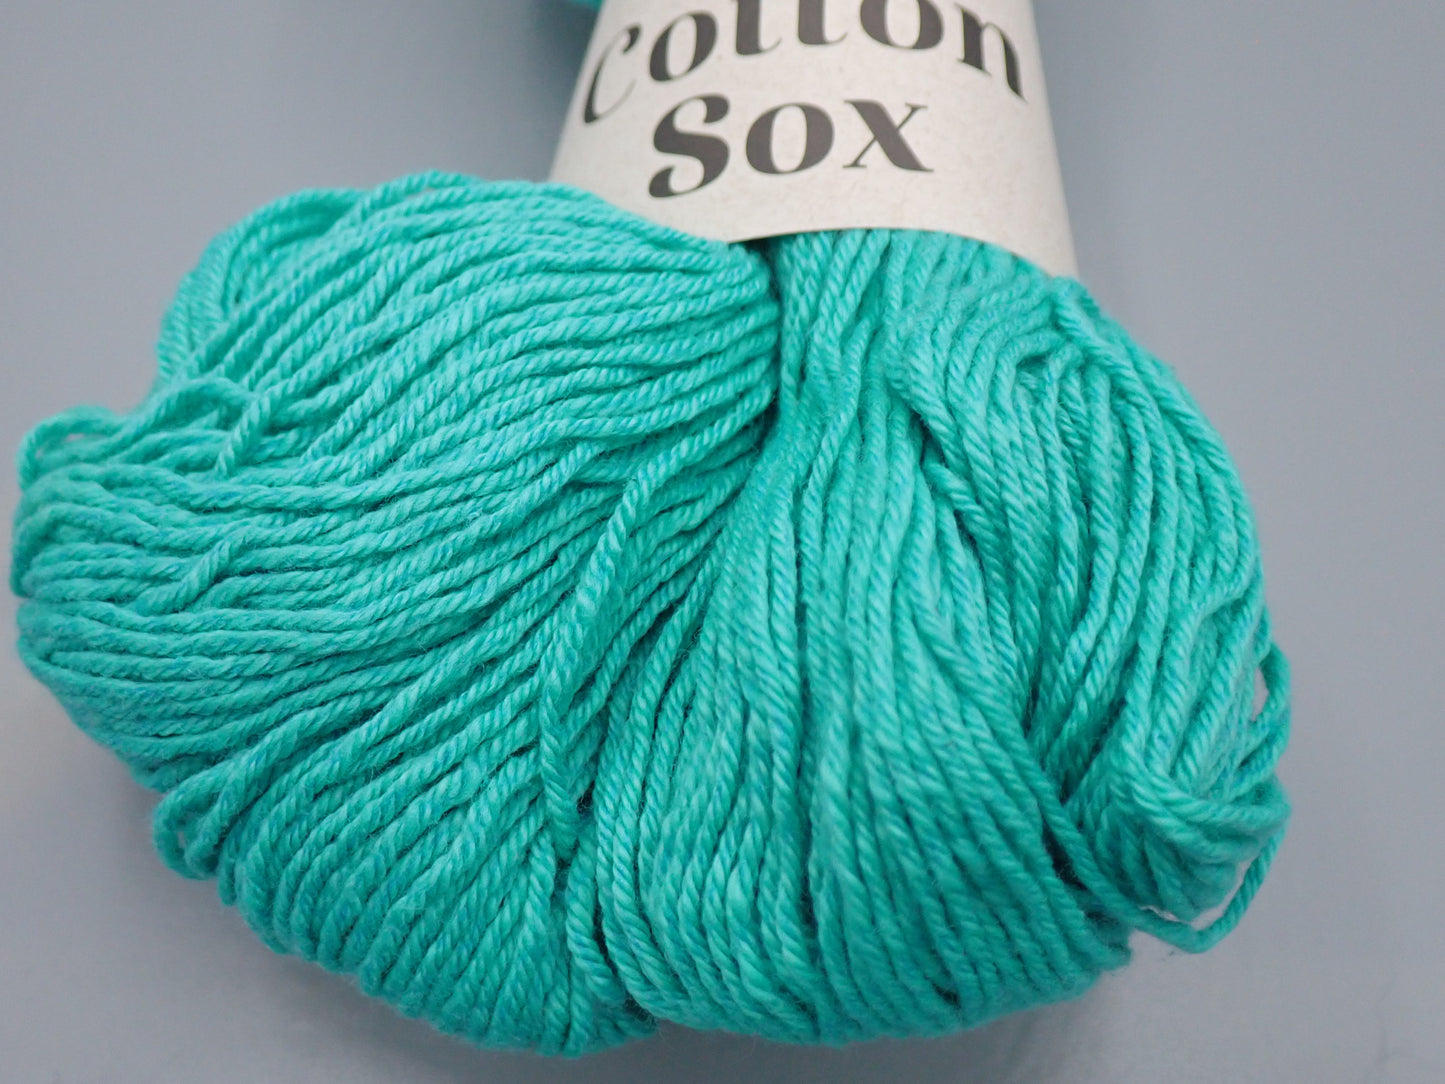 Cascade Yarns Cotton Sox Sock weight Blue Turquoise